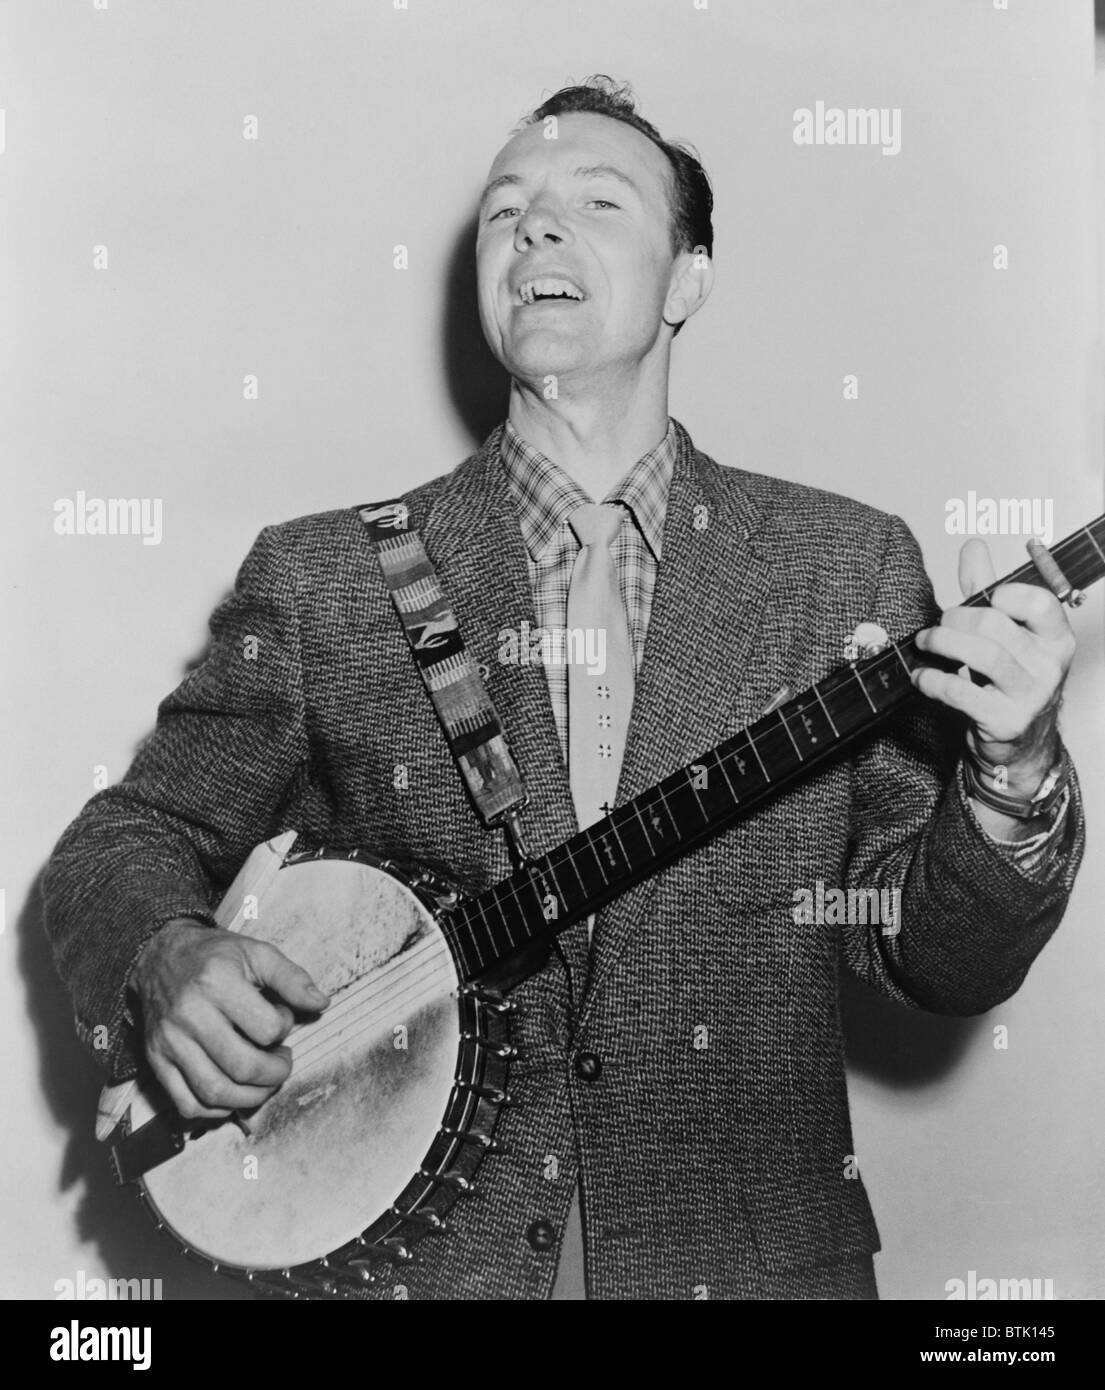 Pete Seeger (b. 1919) singing playing banjo. He wrote many classic folk songs popularized in the 1960s, including “Where Have All the Flowers Gone,” “If I Had a Hammer,” and “Turn, Turn, Turn.” Stock Photo